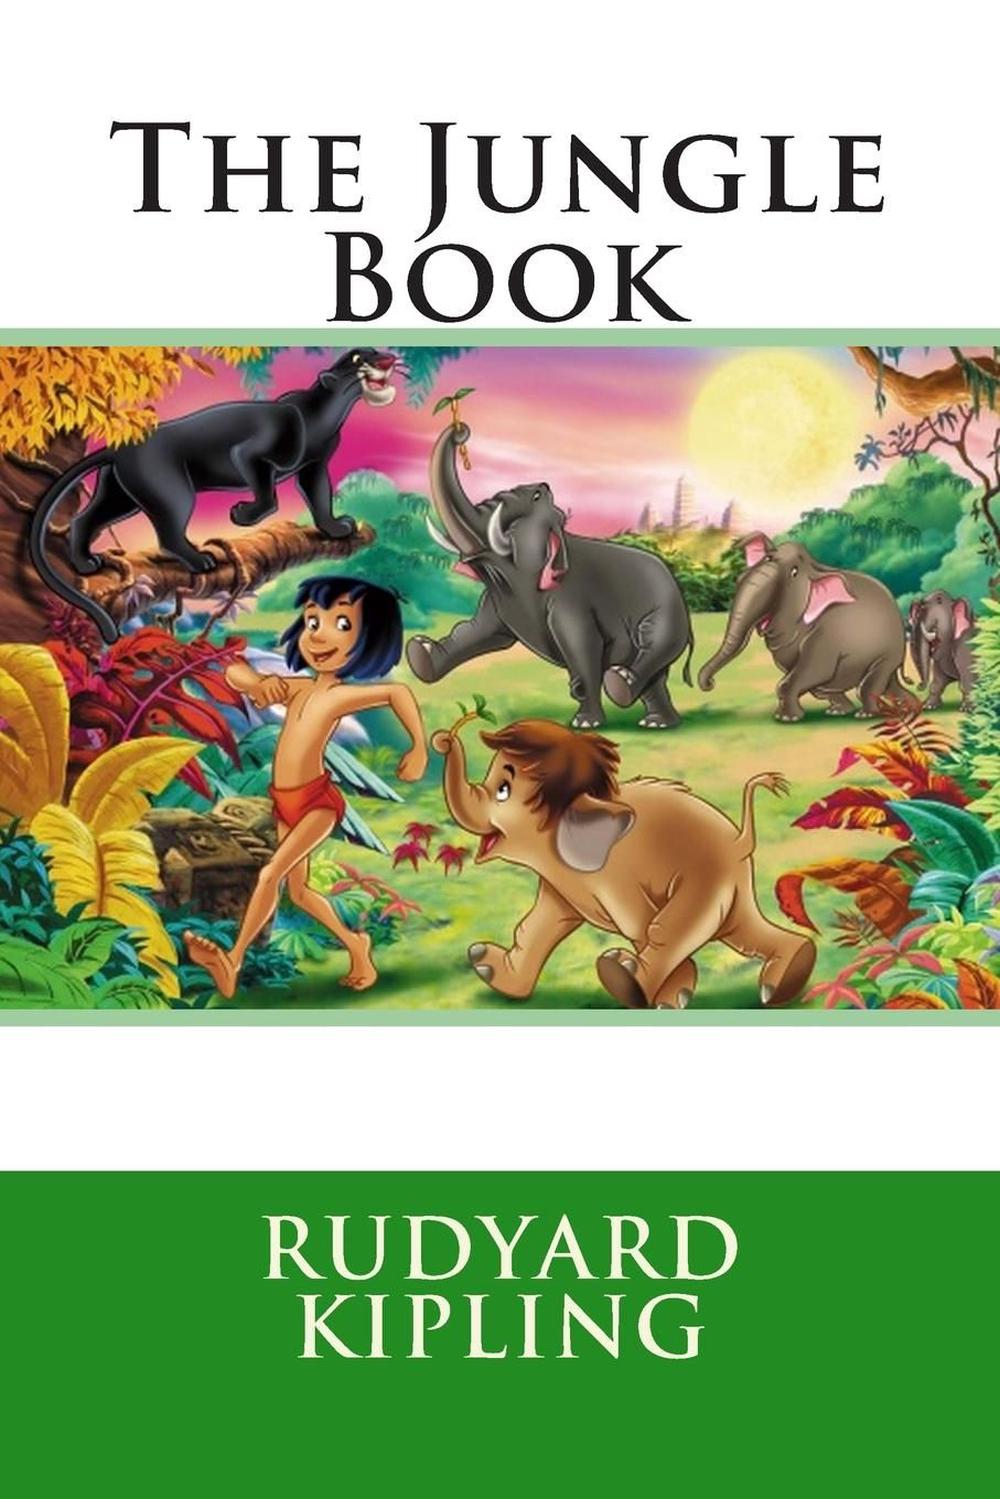 book review of the jungle book written by rudyard kipling